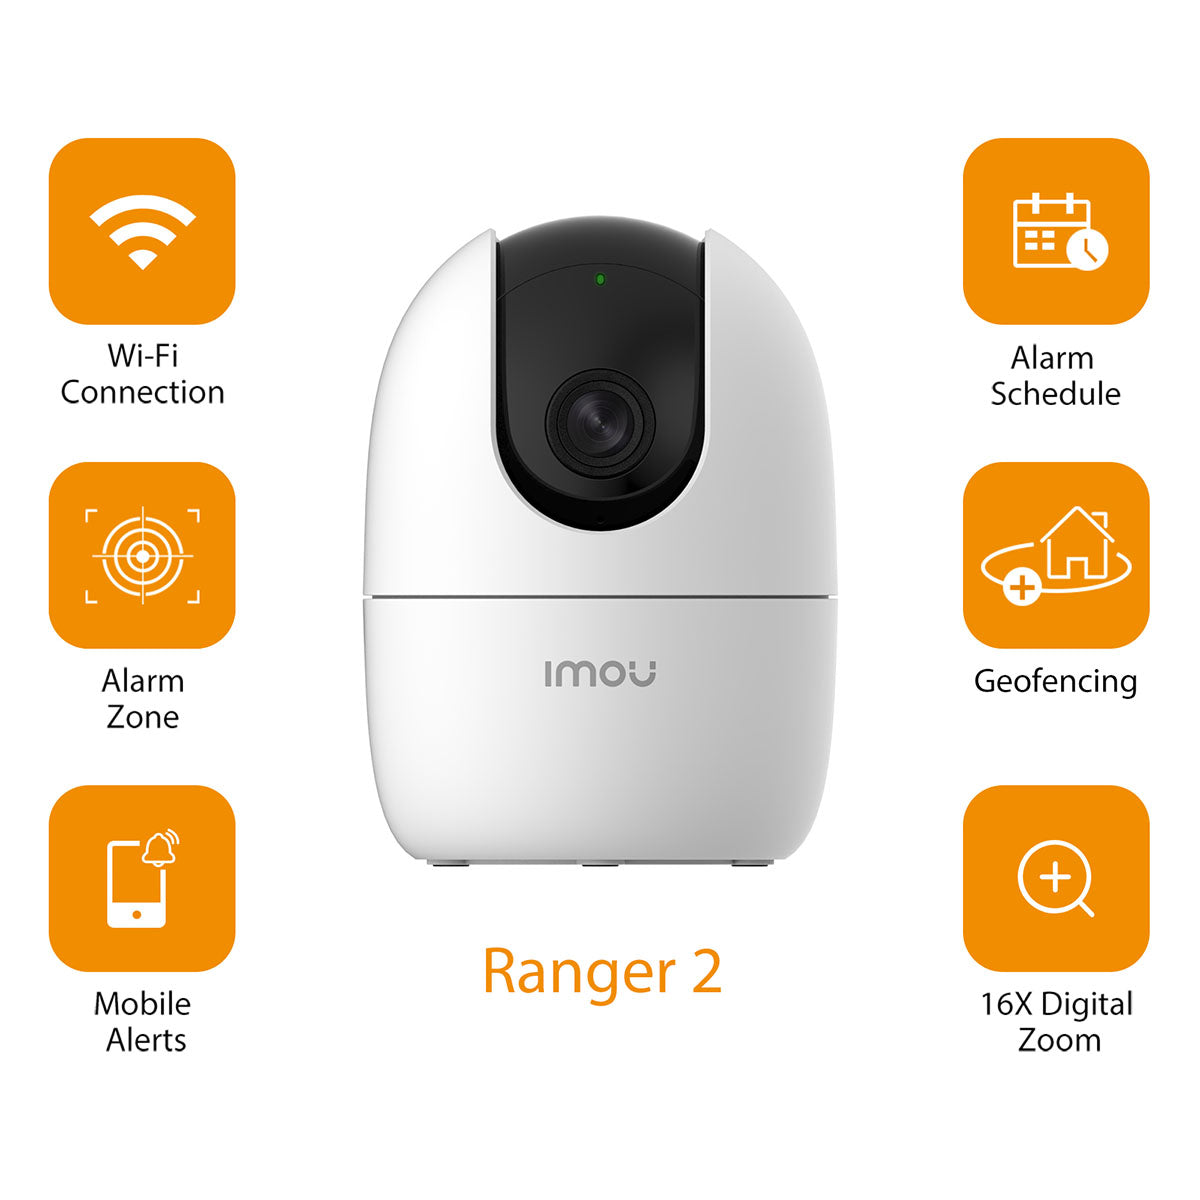 Imou-Ranger-2-1080p-plus-Sandisk-64gb-micro-sdxc-card-Product-Features1-CC470-1-ipc-a22ep-g